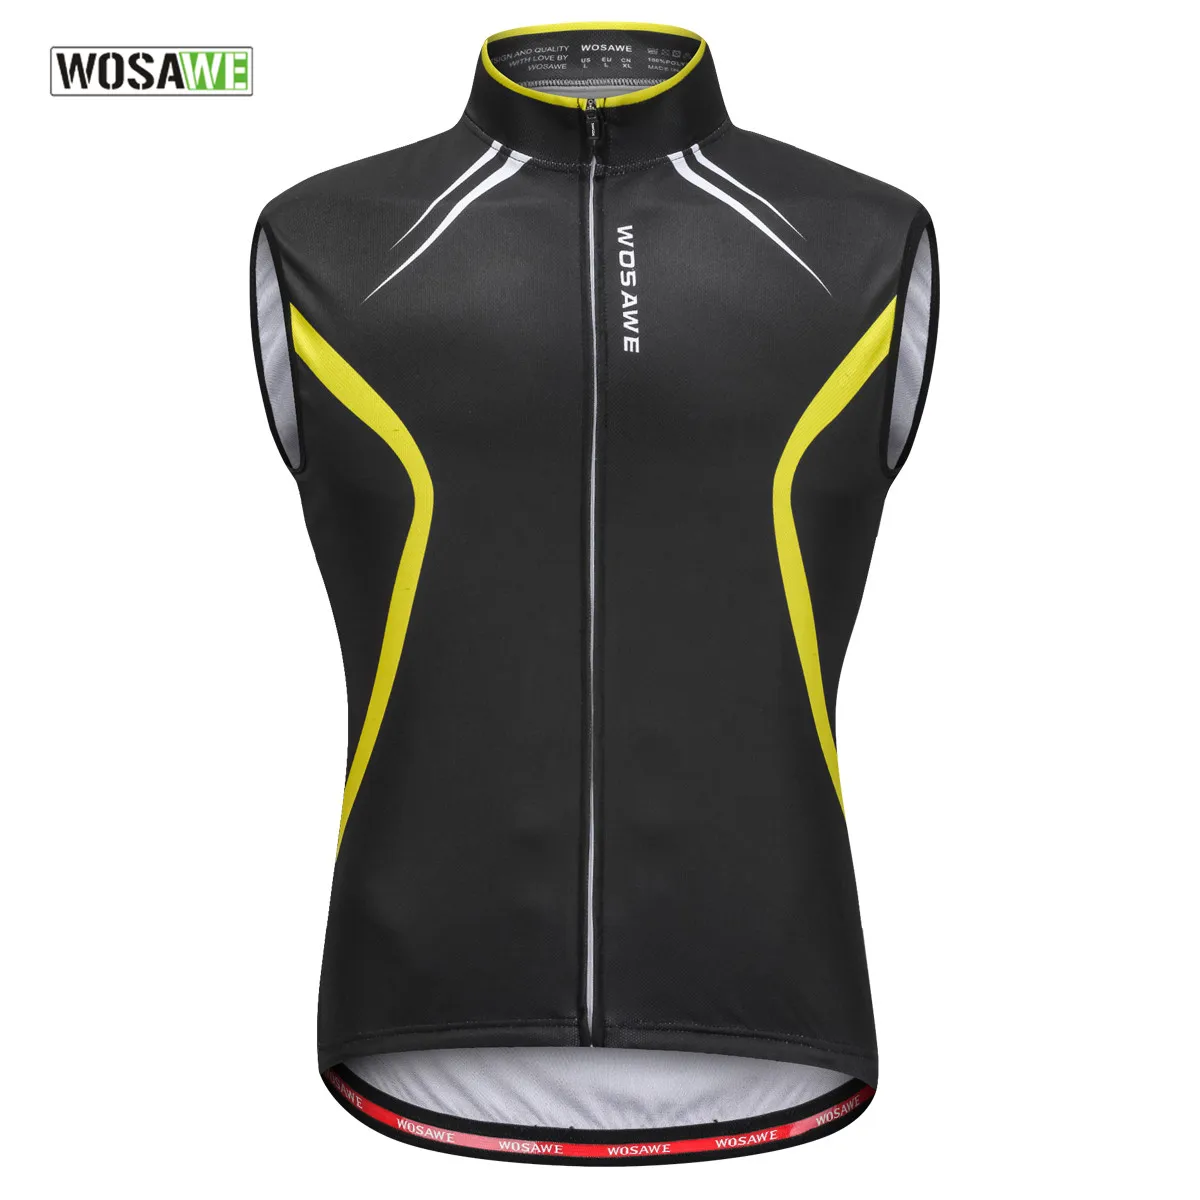 WOSAWE Mens Cycling Sleeveless Jersey Biking Racing Top Vest with Rear Pockets